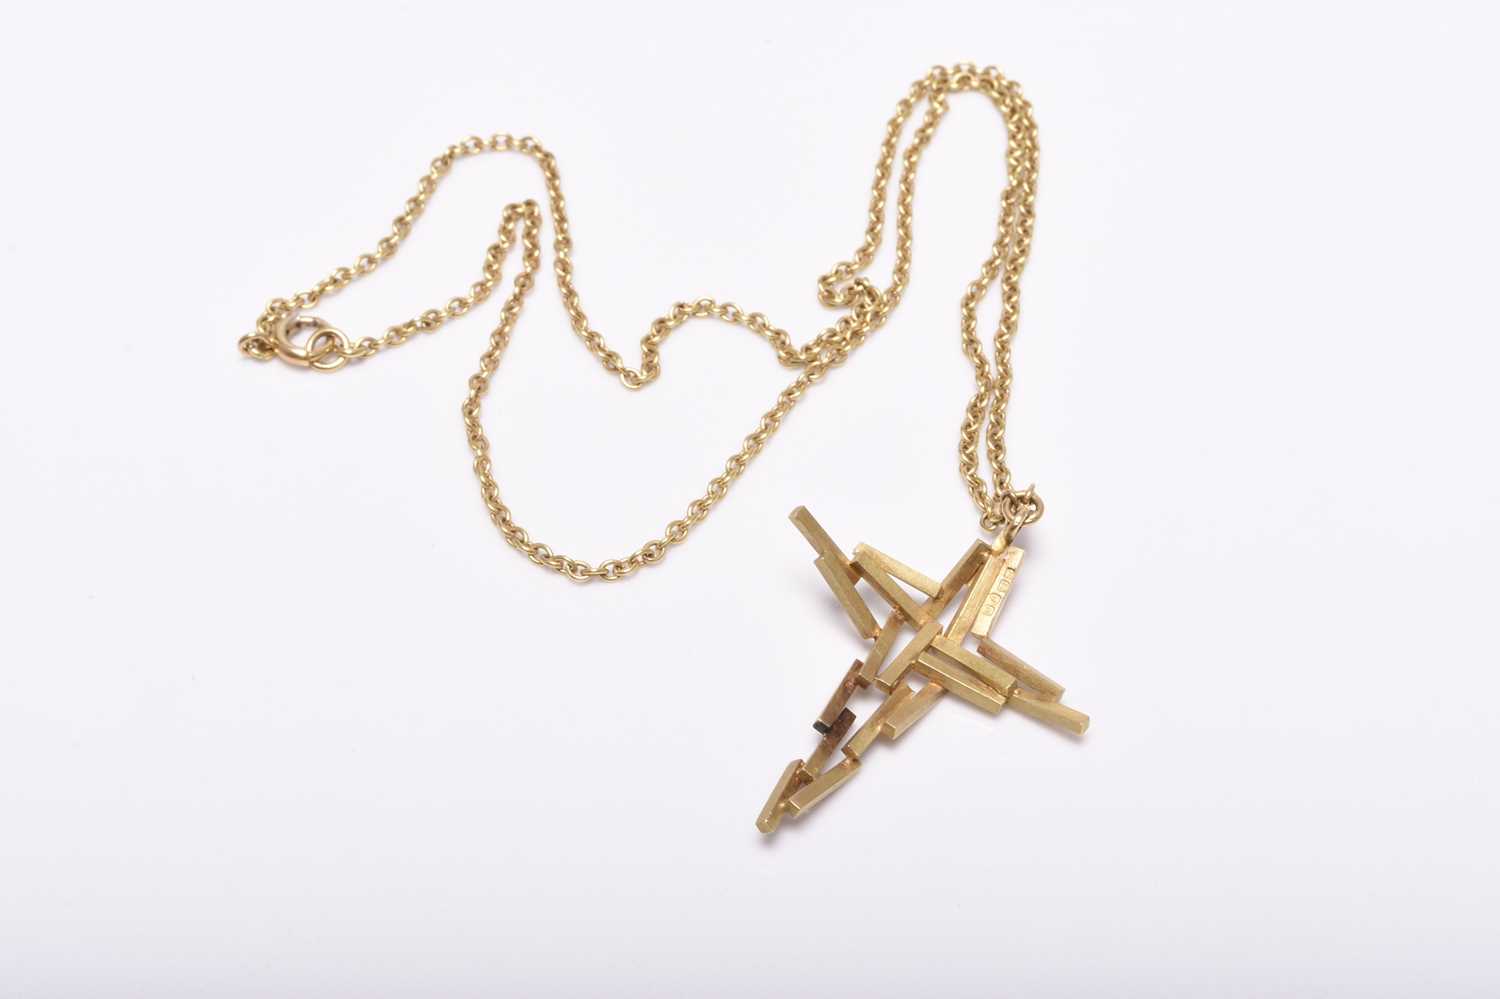 An 18ct gold John Donald abstract crucifix pendant on chain - Image 2 of 2